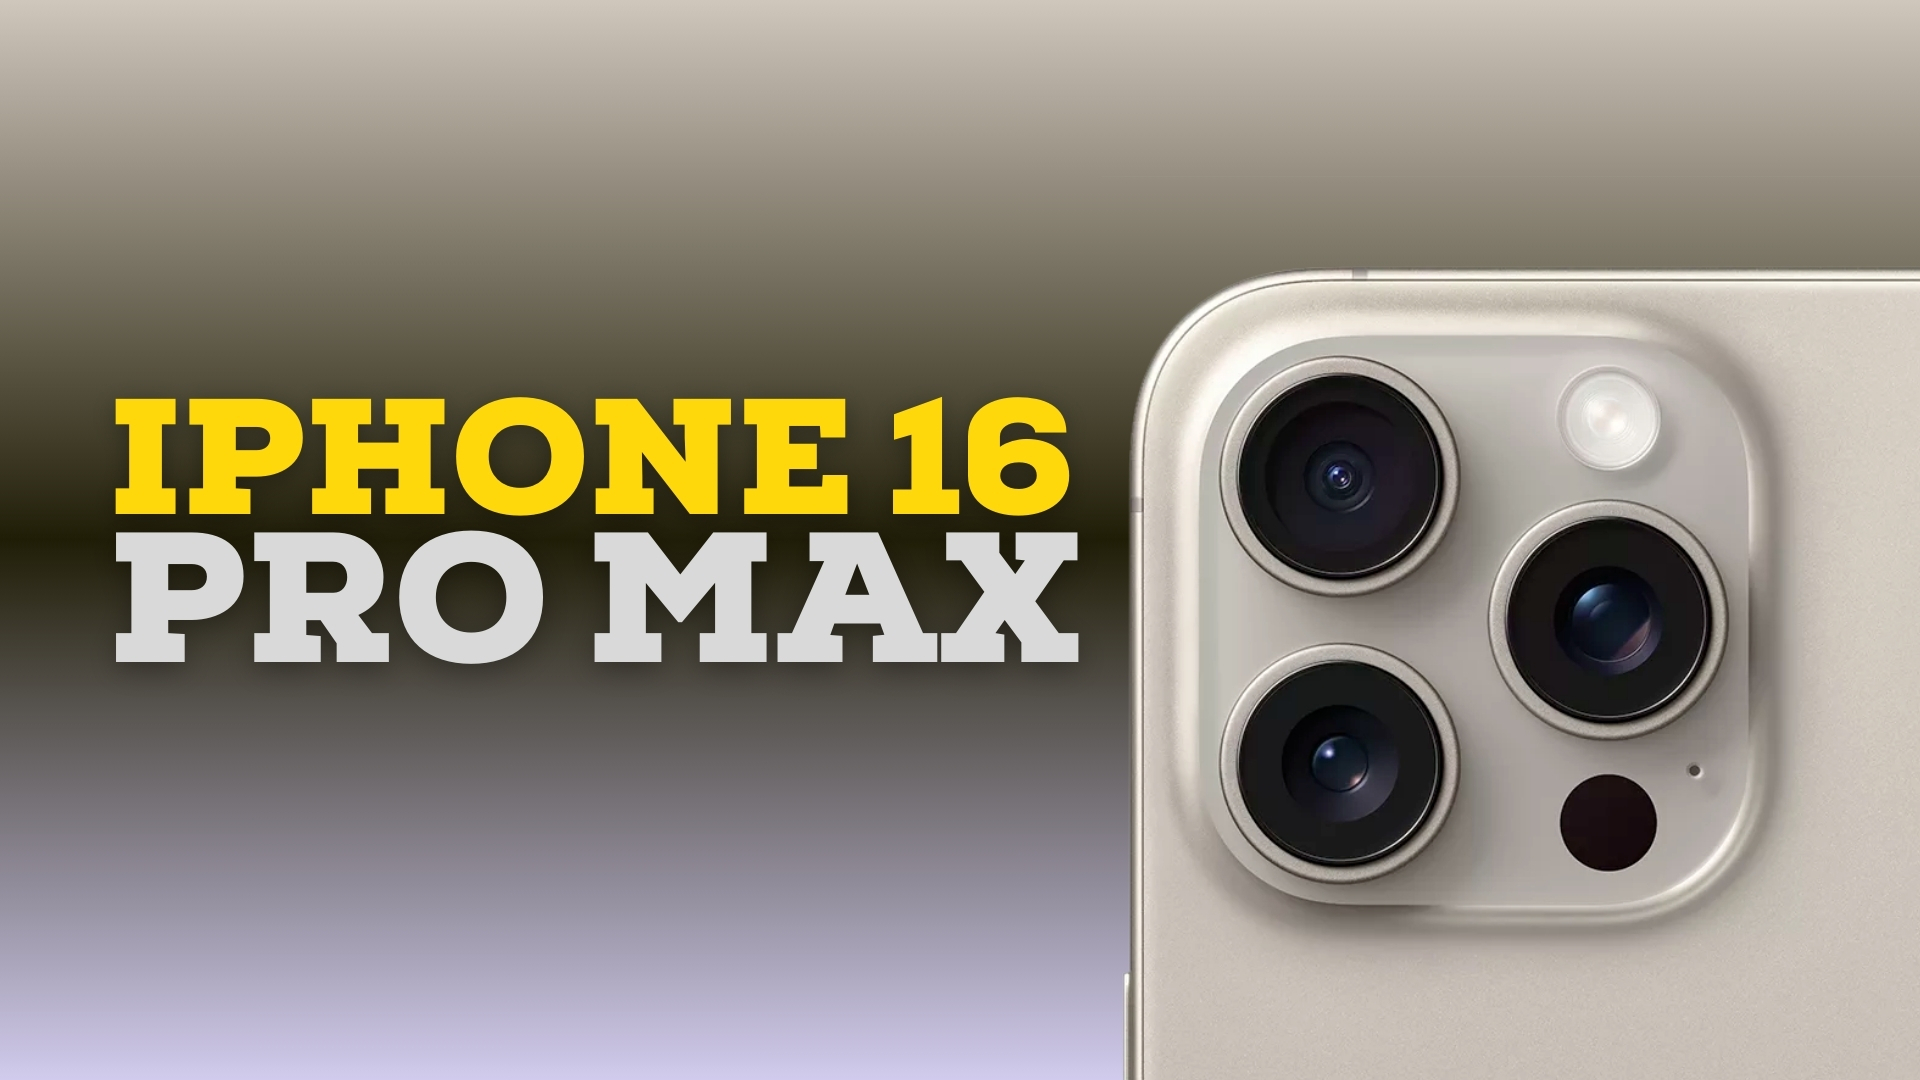 iPhone 16: rumors, leaks, and expected release date